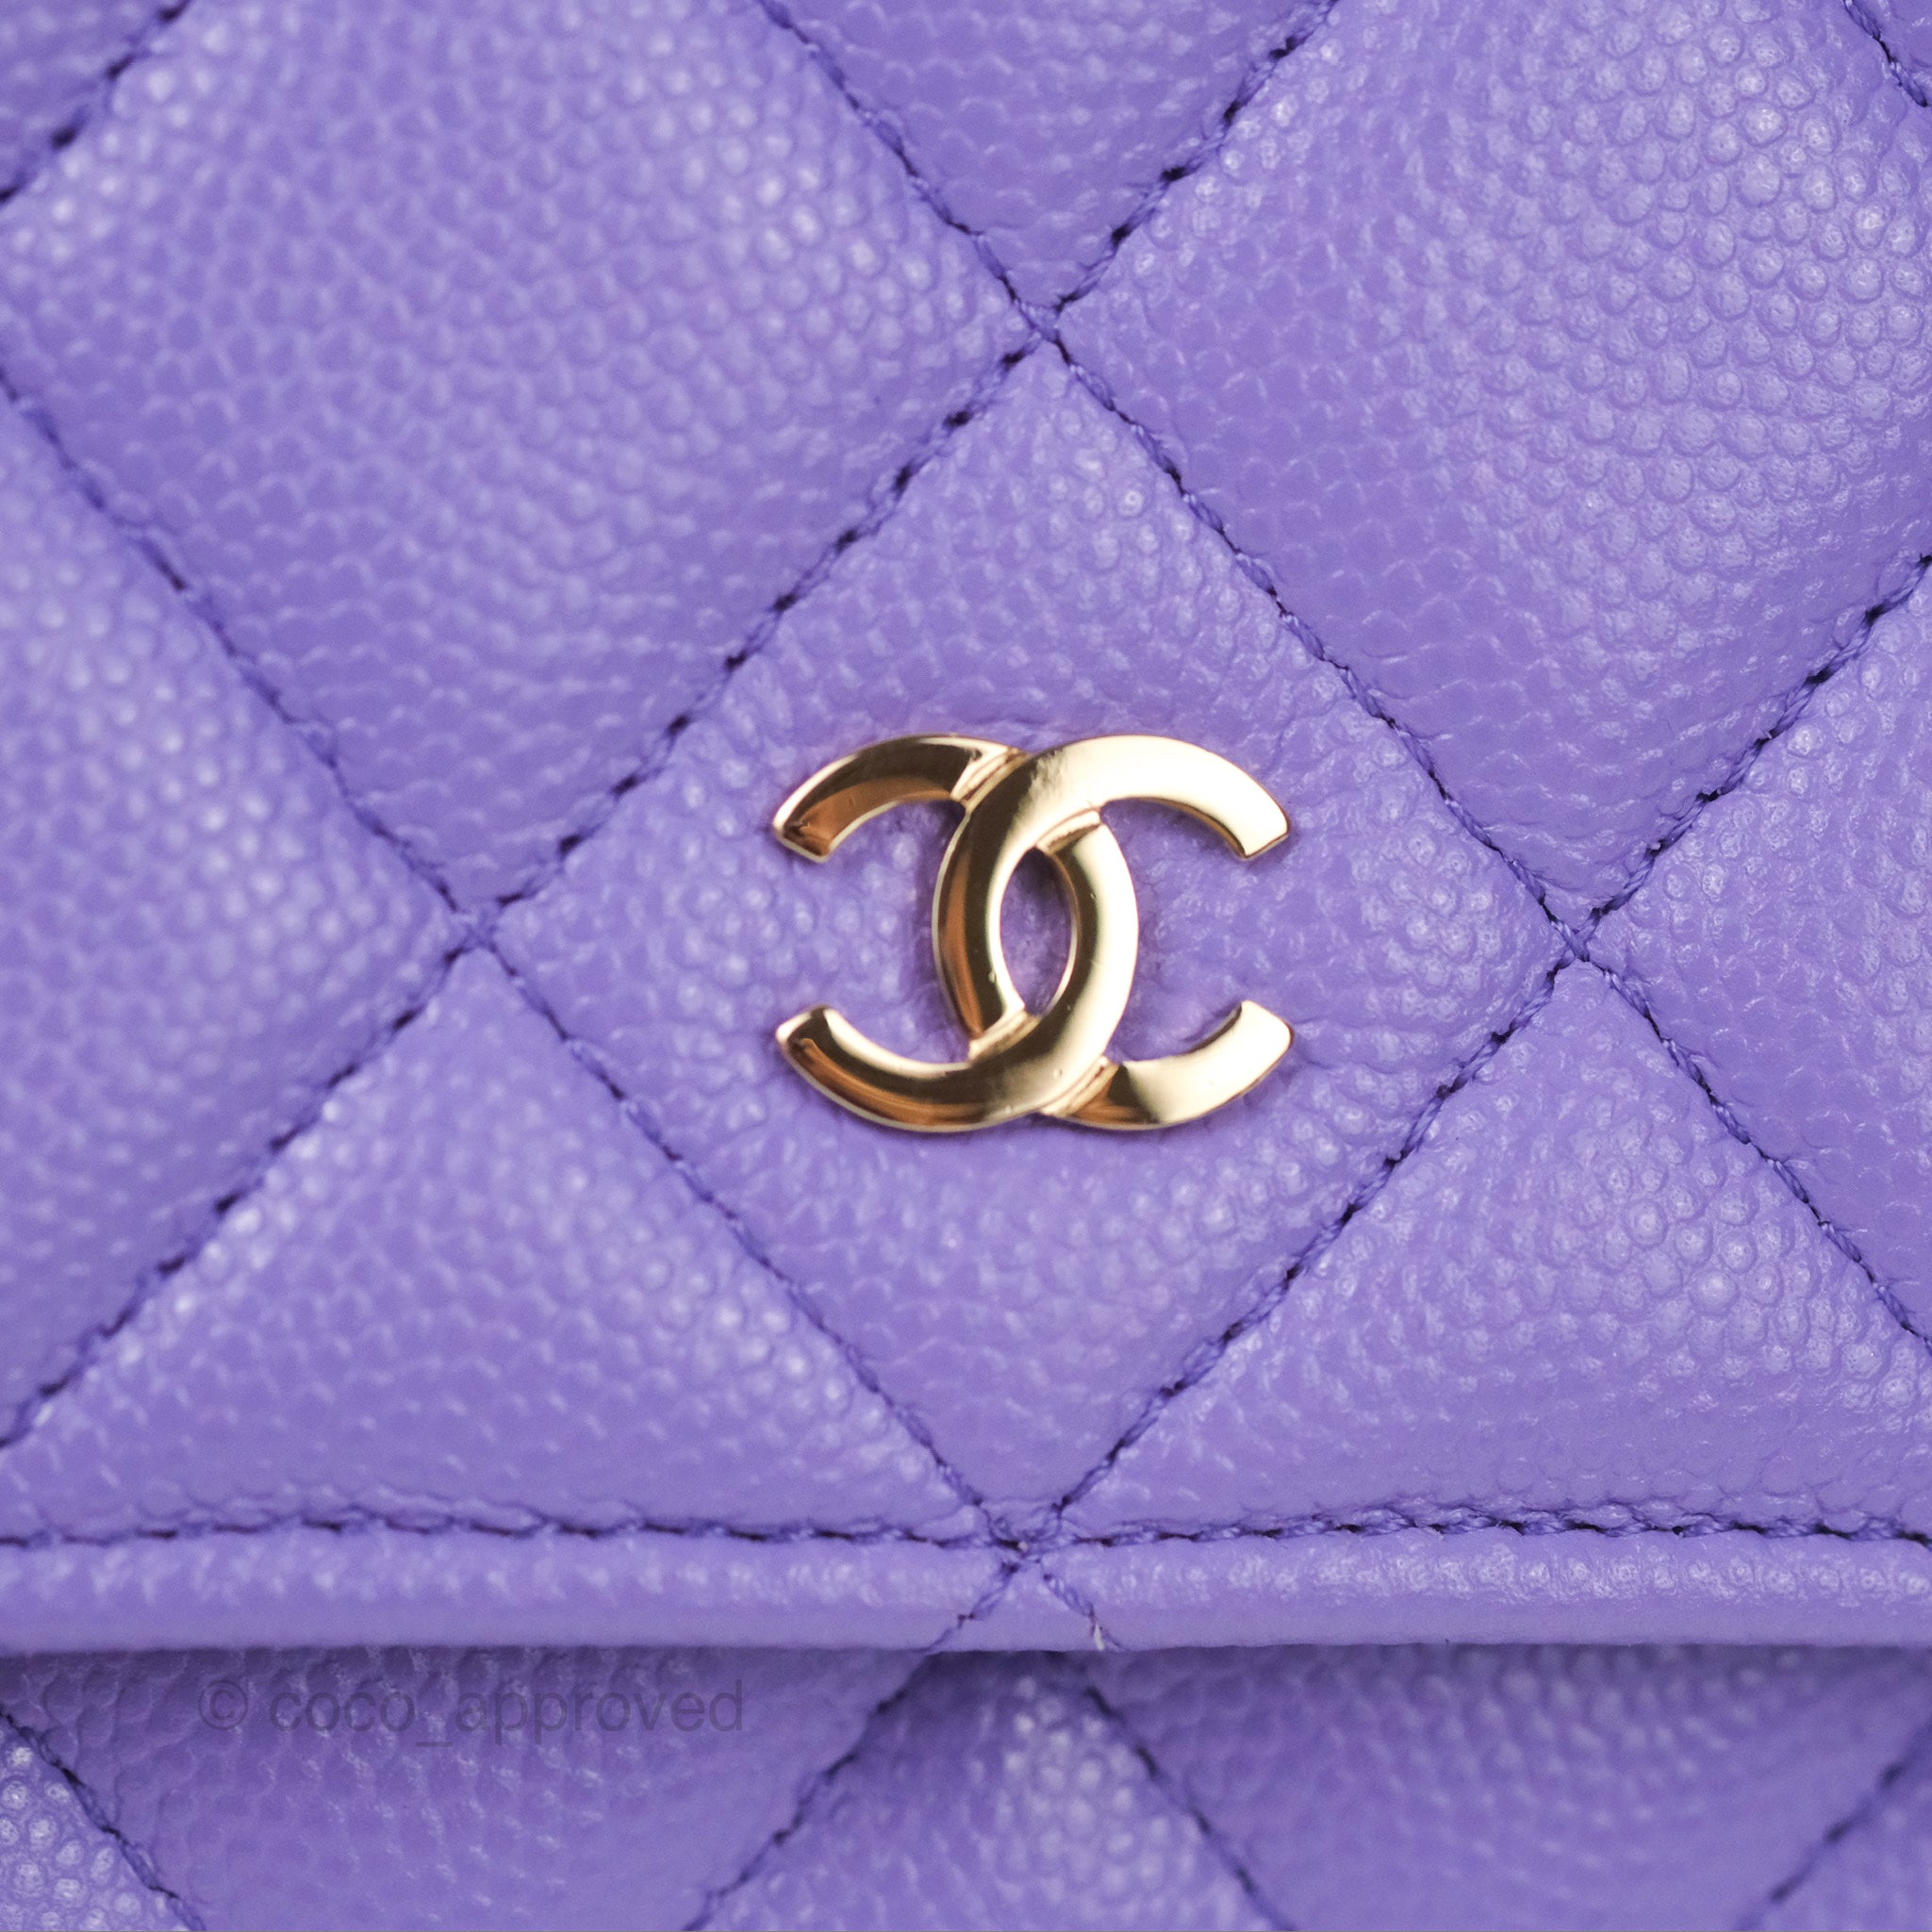 Chanel Quilted Classic Wallet on Chain WOC Purple Caviar Gold Hardware – Coco  Approved Studio